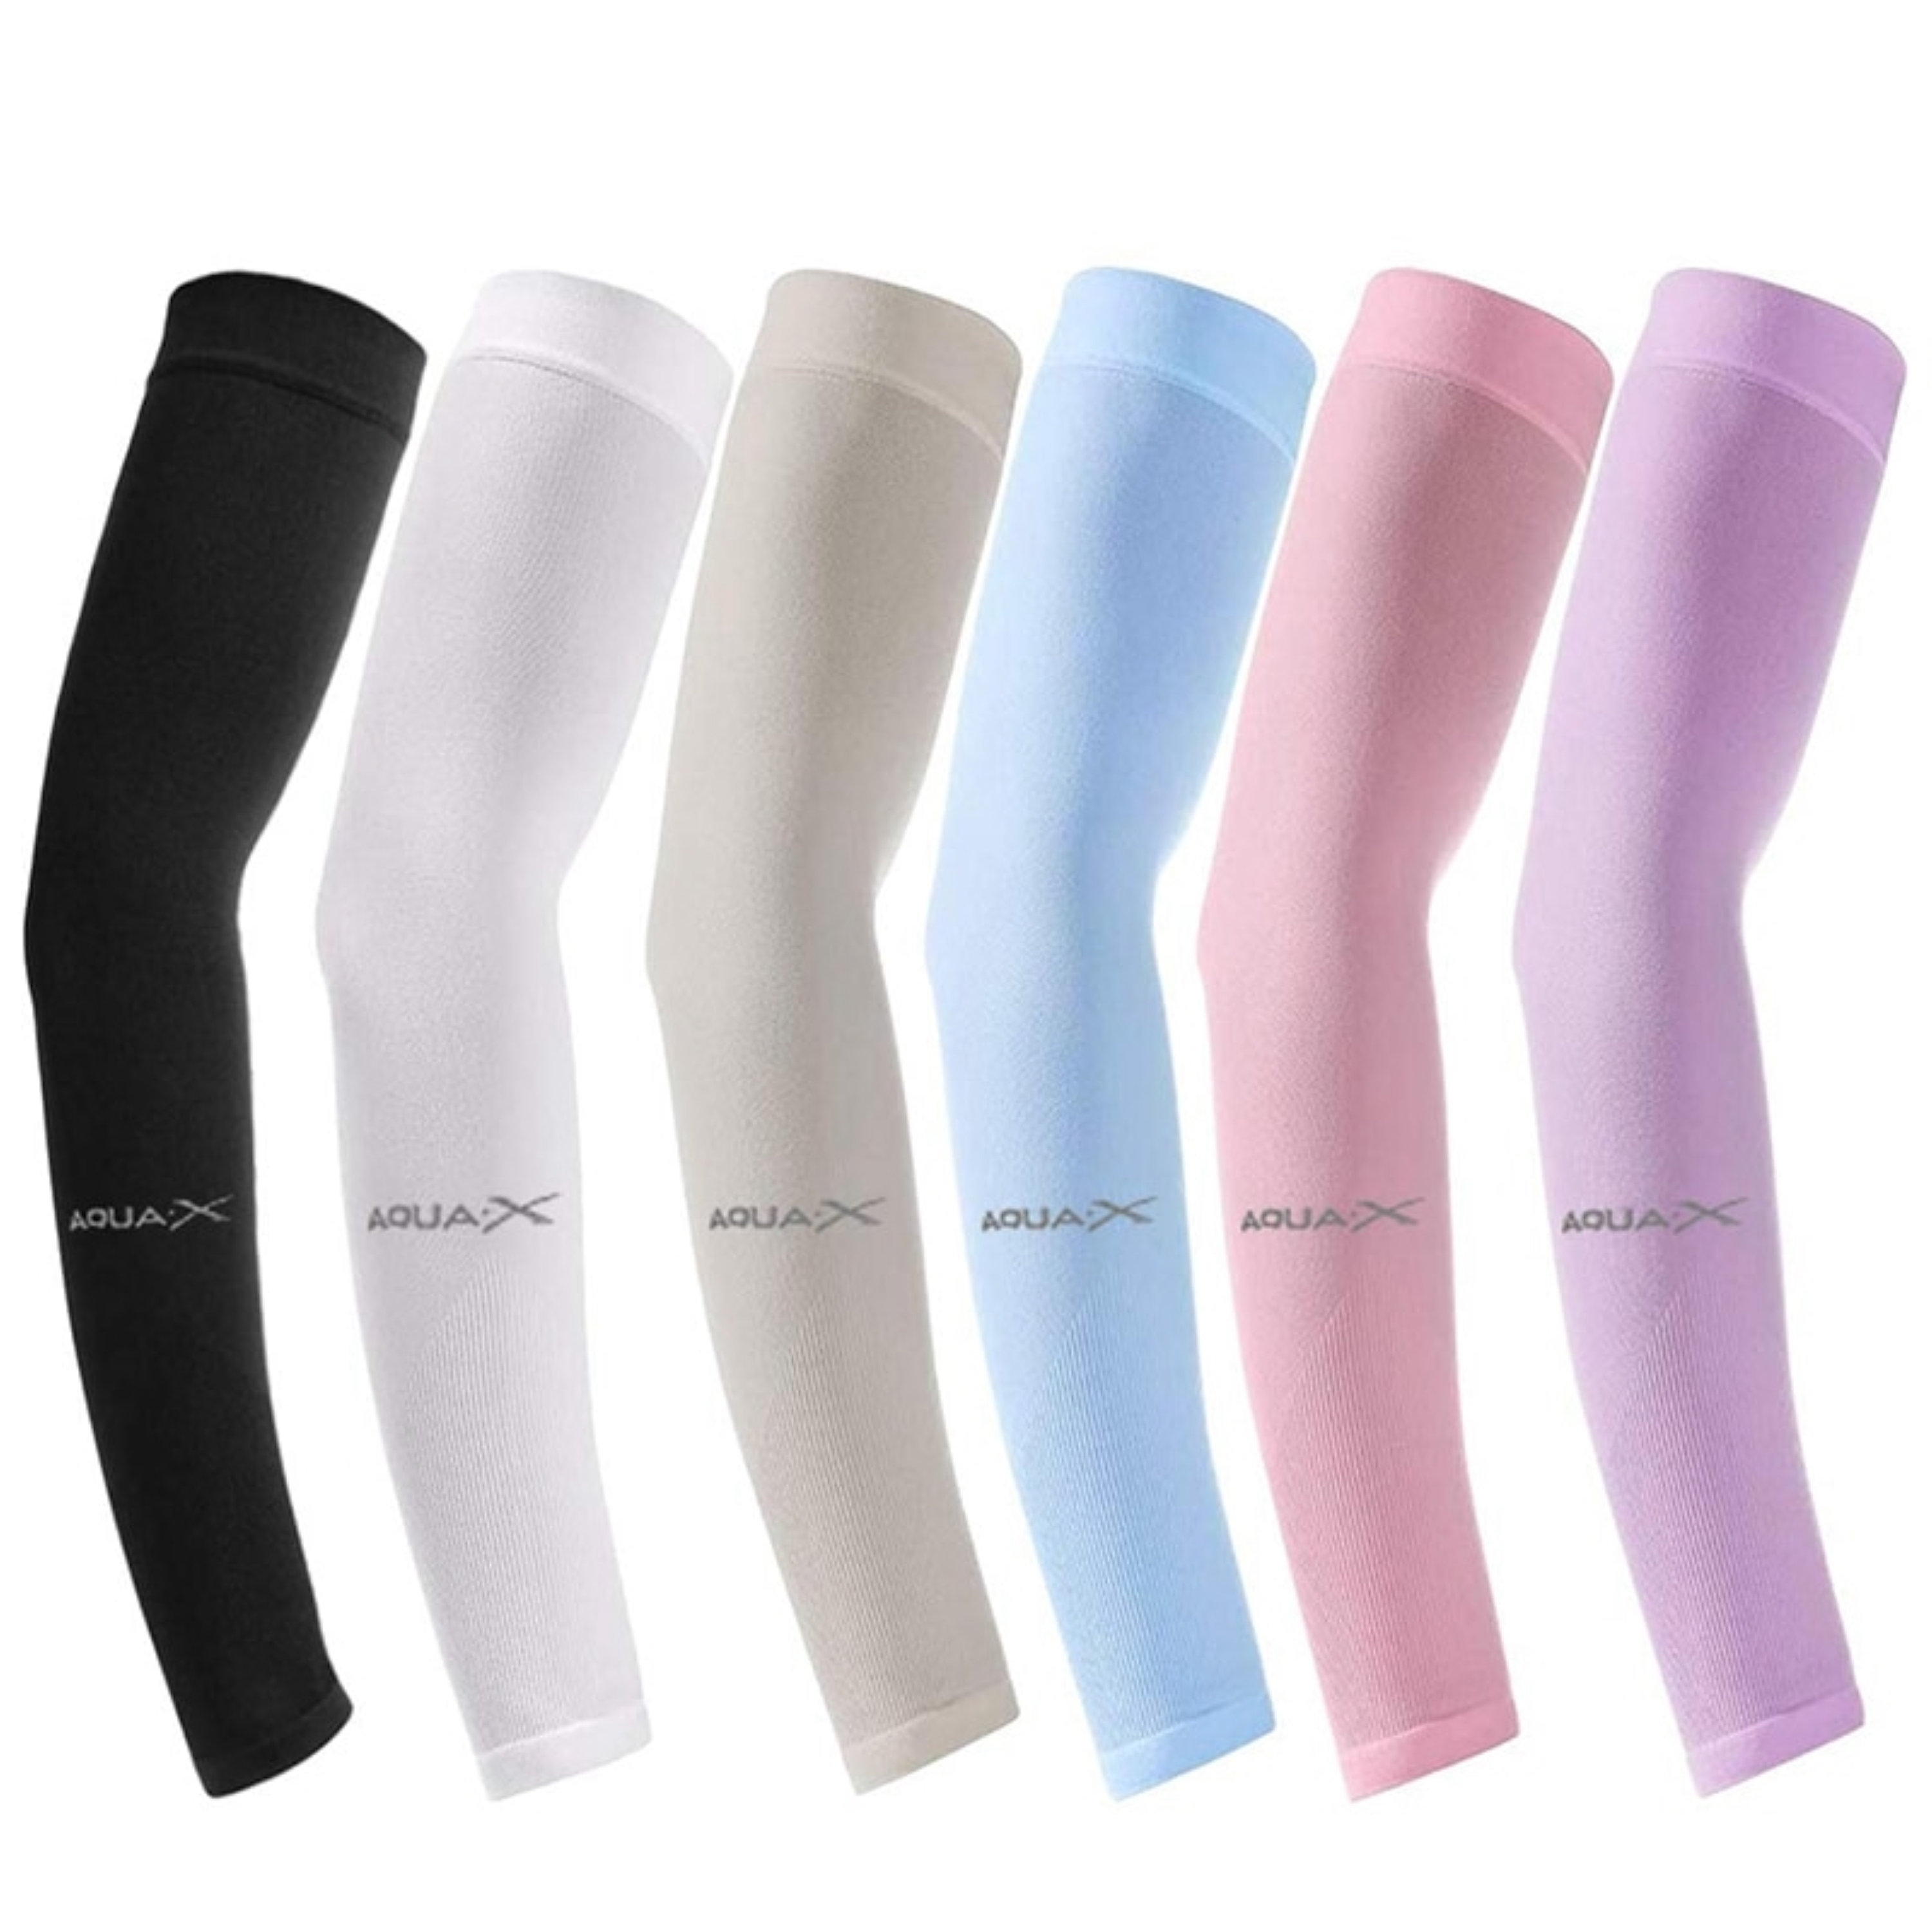  beister Sports Compression Arm Sleeves for Men & Women